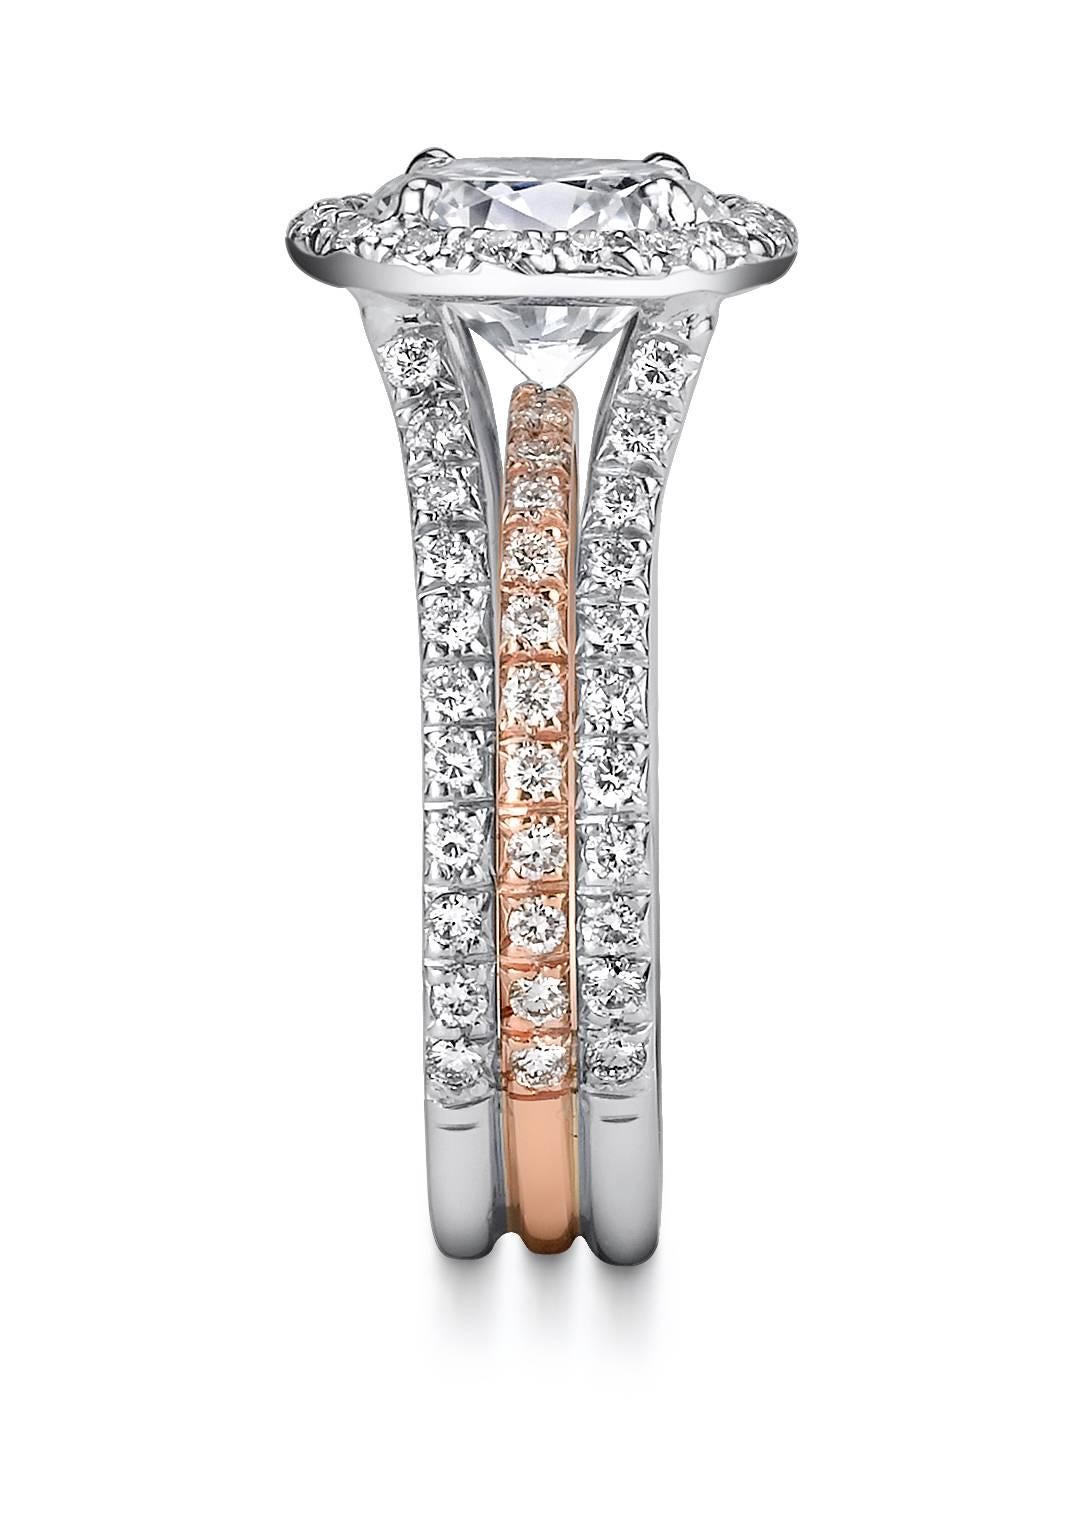 Platinum and 18 Karat Rose Gold Diamond Semi-Mount with a CZ Center Stone Supported by a Triple Row of Micro Pave Ideal Cut Diamonds. Ideal Cut Diamond Quality E/VS2 with a Total Weight of 1.17CT. 

Please note, our price here reflects the